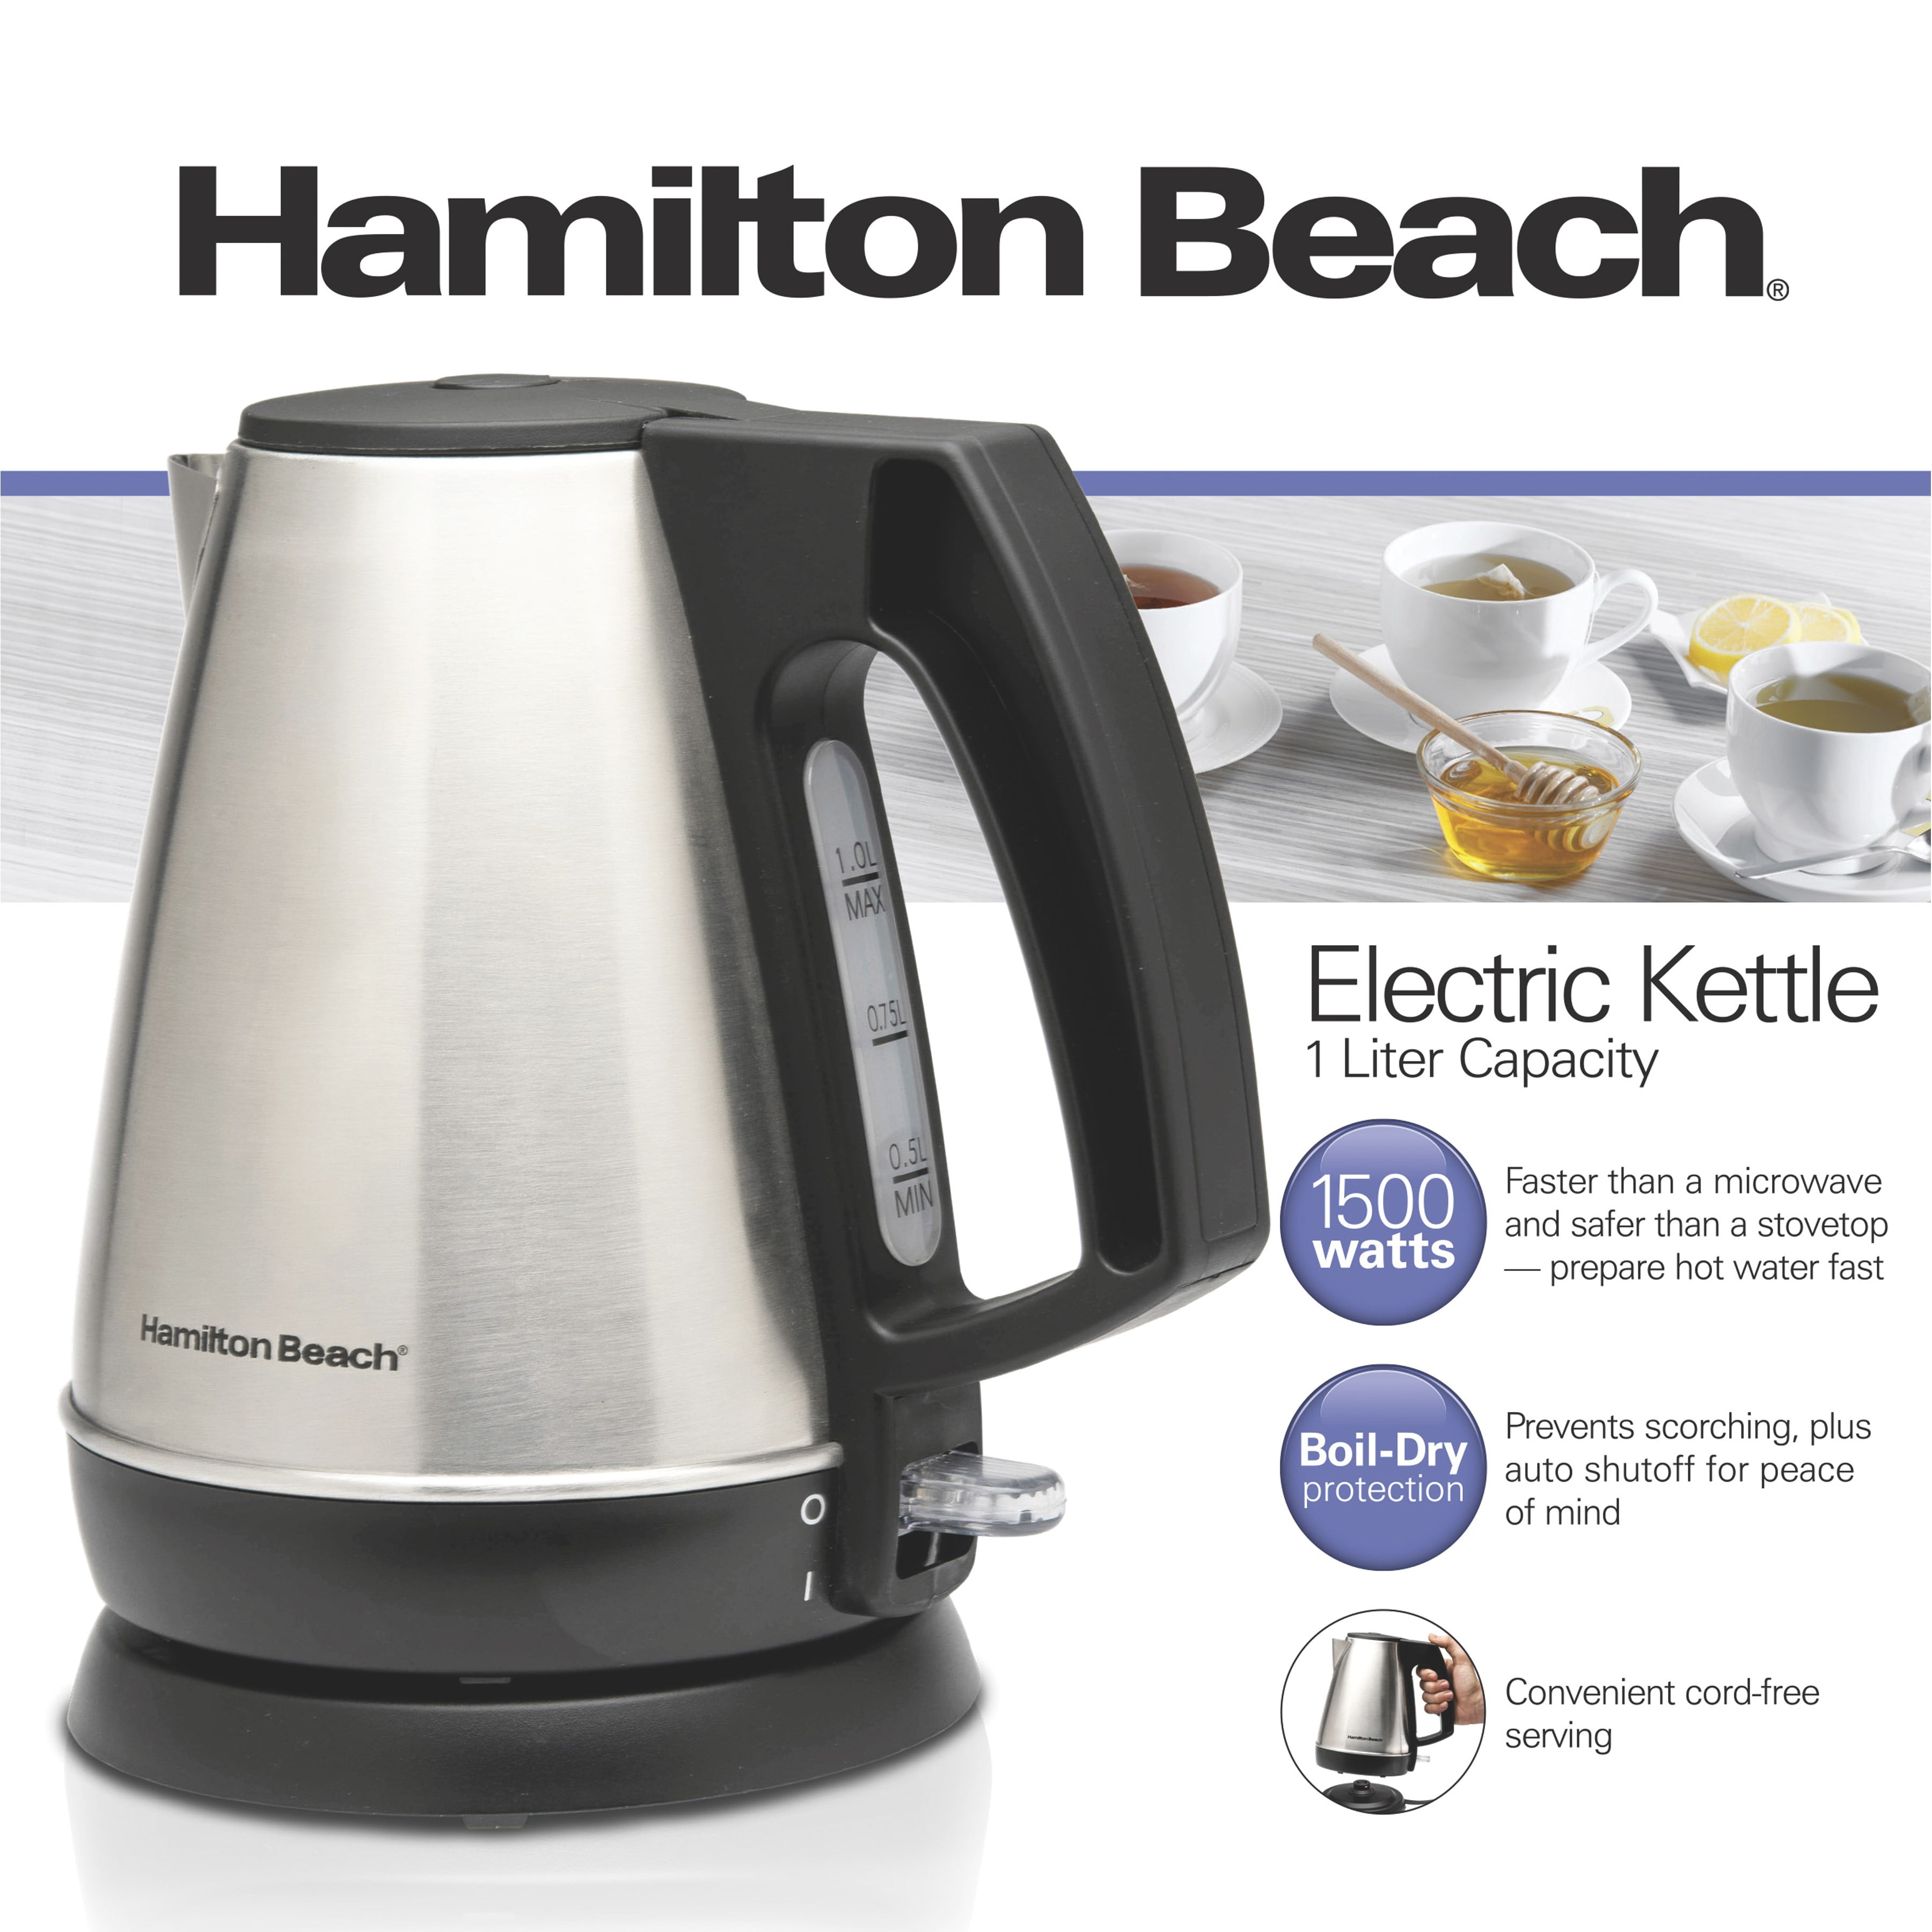 Hamilton Beach 1 Liter Electric Kettle, Stainless Steel and Black